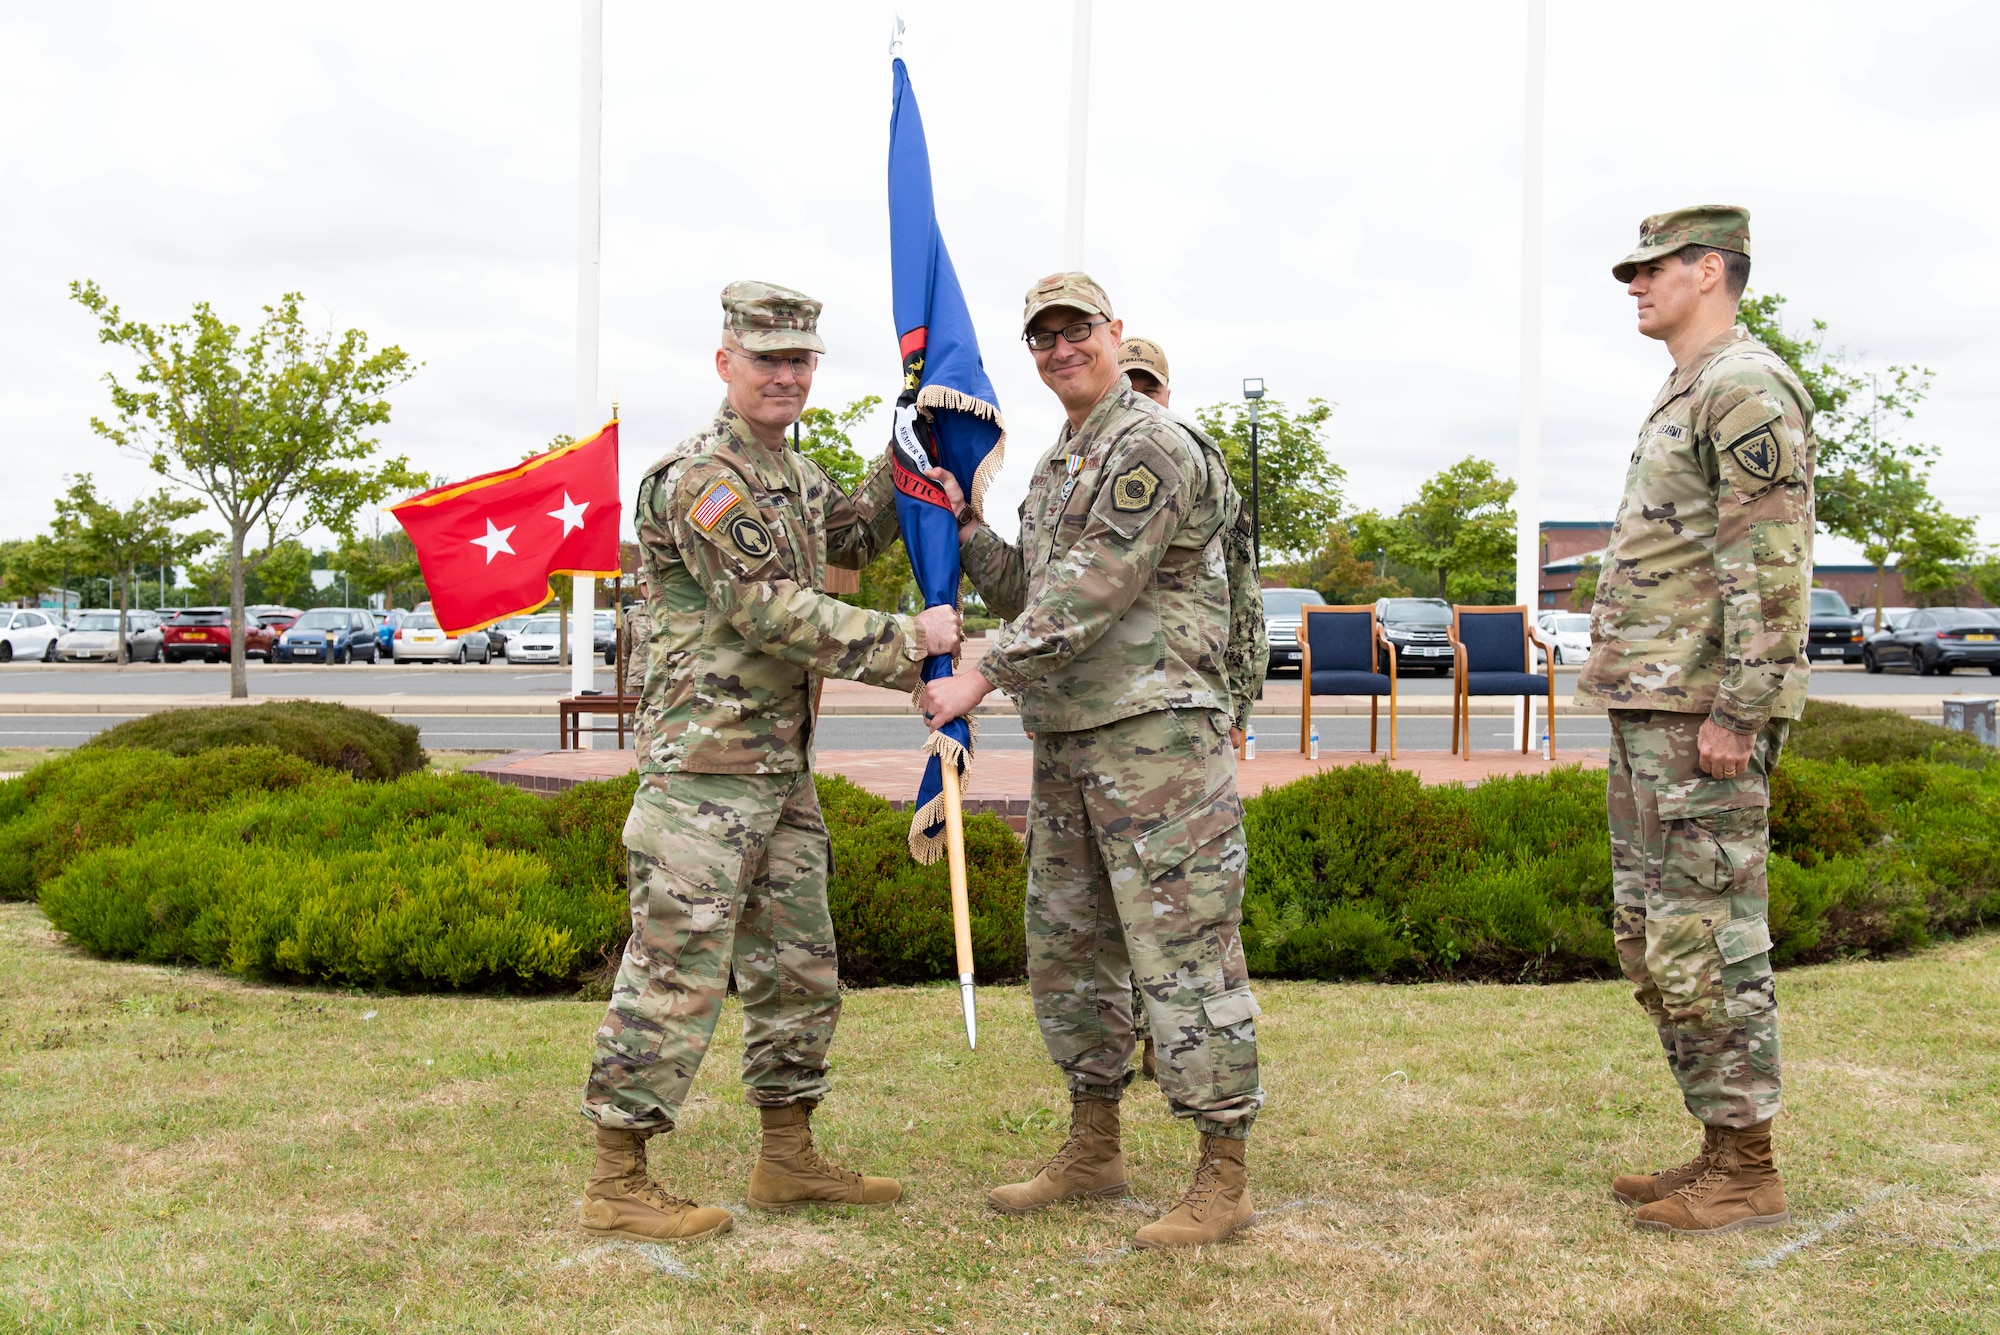 U.S. Air Force Col. Abraham Jackson, right, U.S. European Command Joint Intelligence Operations Center Europe Analytic Center outgoing commander, relinquishes command during the JIOCEUR Analytic Center change of command ceremony at Royal Air Force Molesworth, England, July 7, 2022. The change of command ceremony is rooted in military history dating back to the 18th century representing the relinquishing of power from one officer to another. (U.S. Air Force photo by Senior Airman Jennifer Zima)